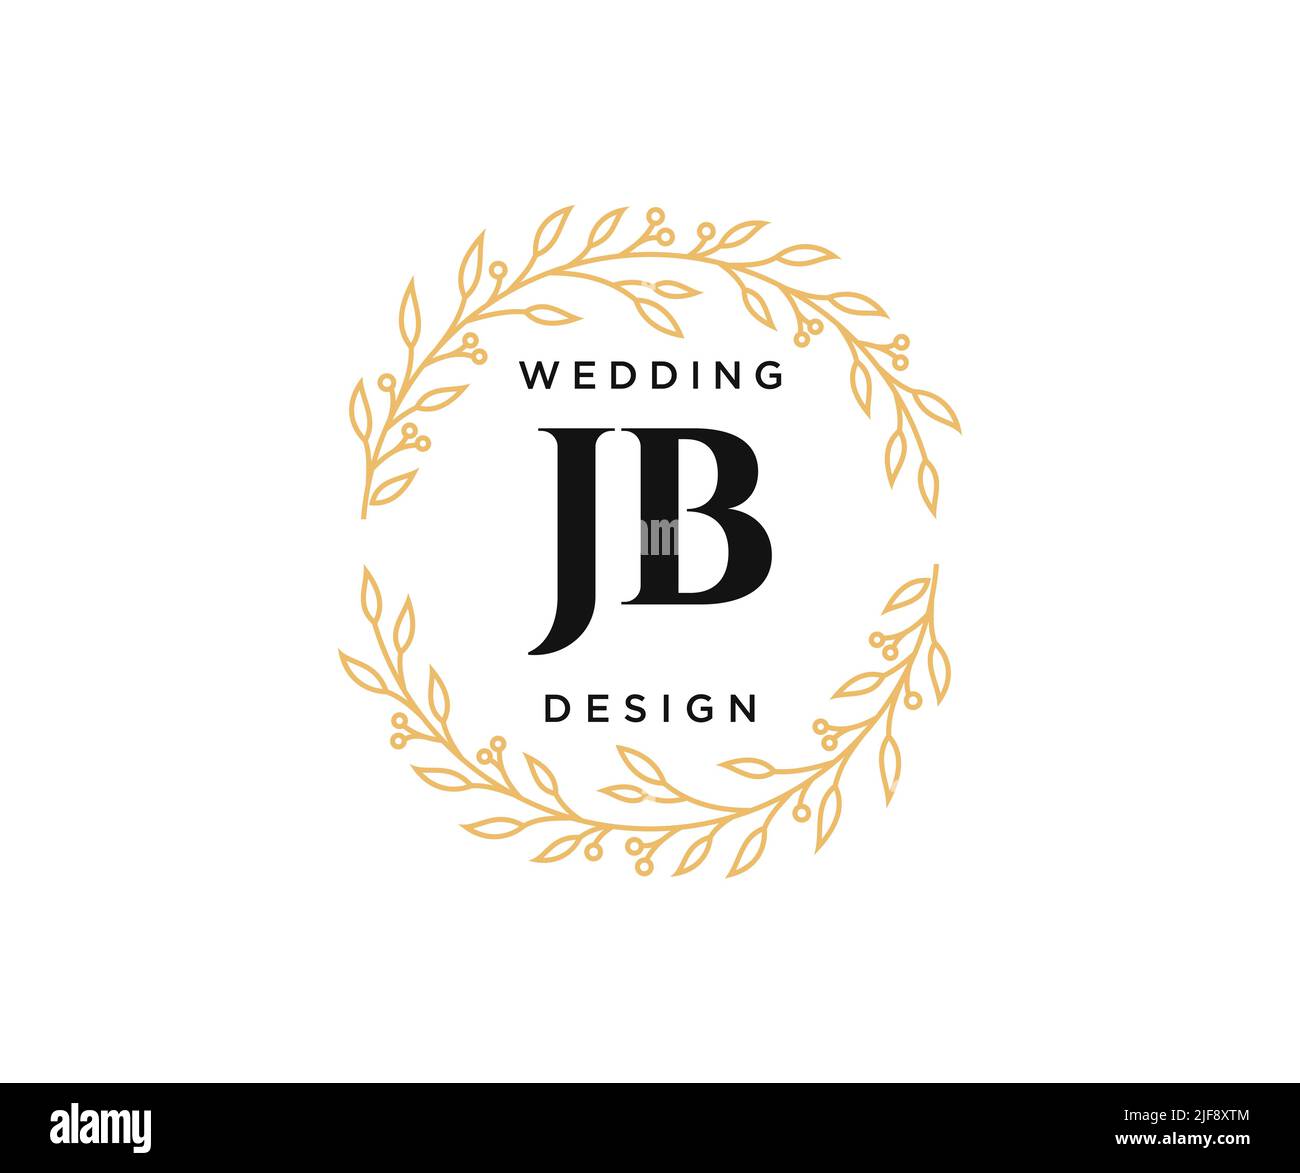 https://c8.alamy.com/comp/2JF8XTM/jb-initials-letter-wedding-monogram-logos-collection-hand-drawn-modern-minimalistic-and-floral-templates-for-invitation-cards-save-the-date-elegant-2JF8XTM.jpg